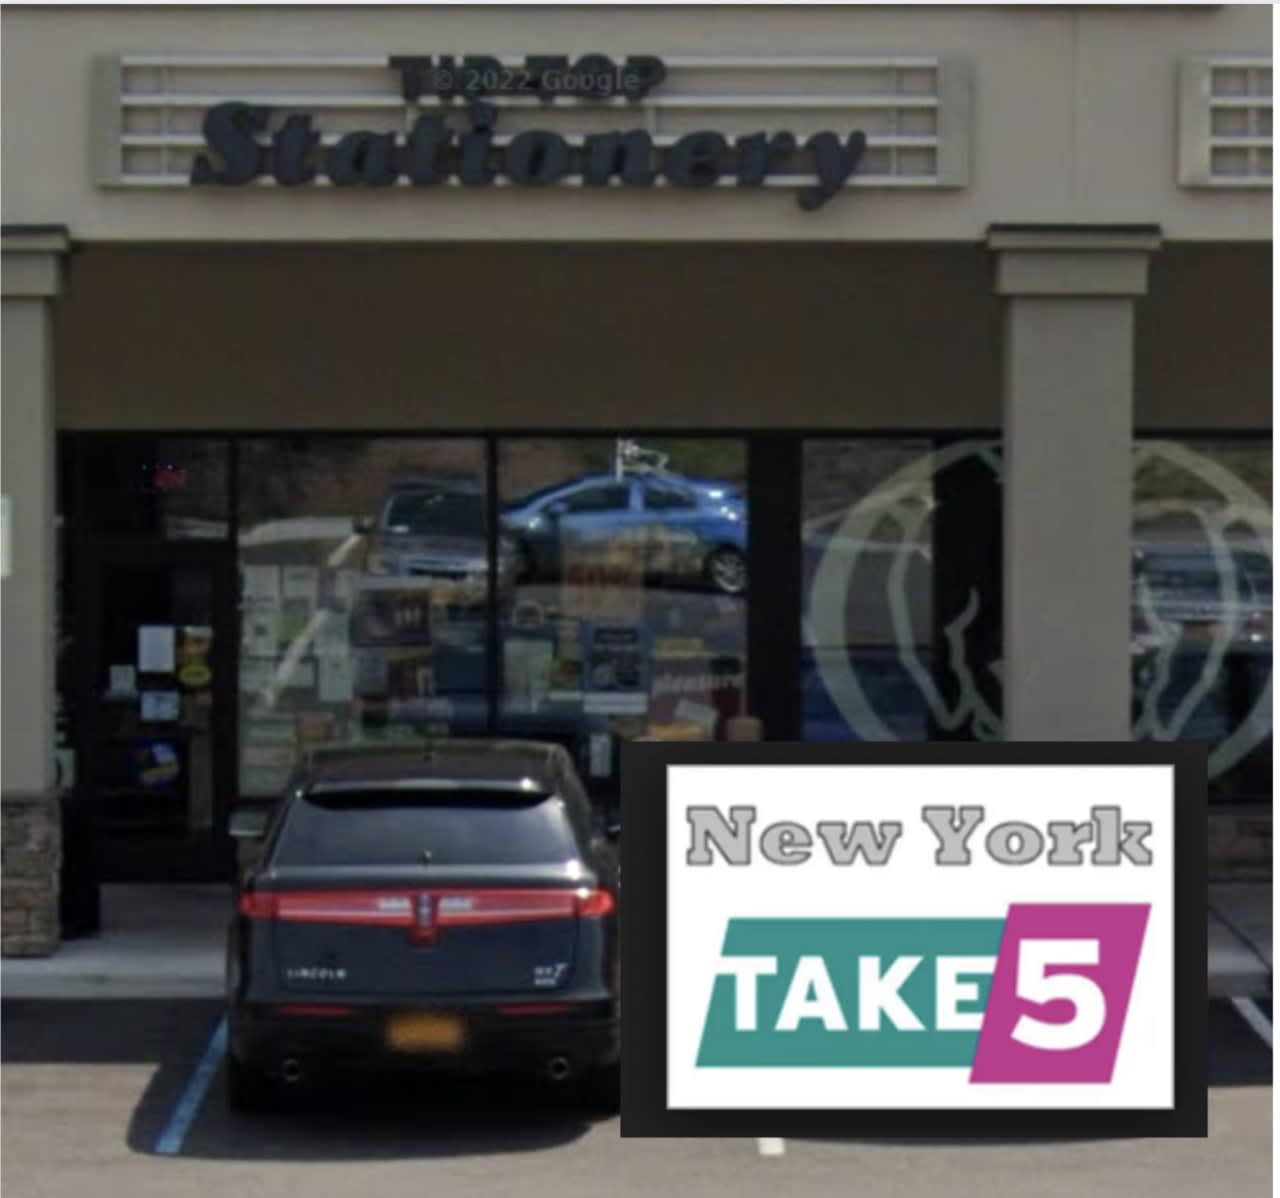 A lucky Hudson Valley Lotto player won the top prize on a Take 5 ticket.